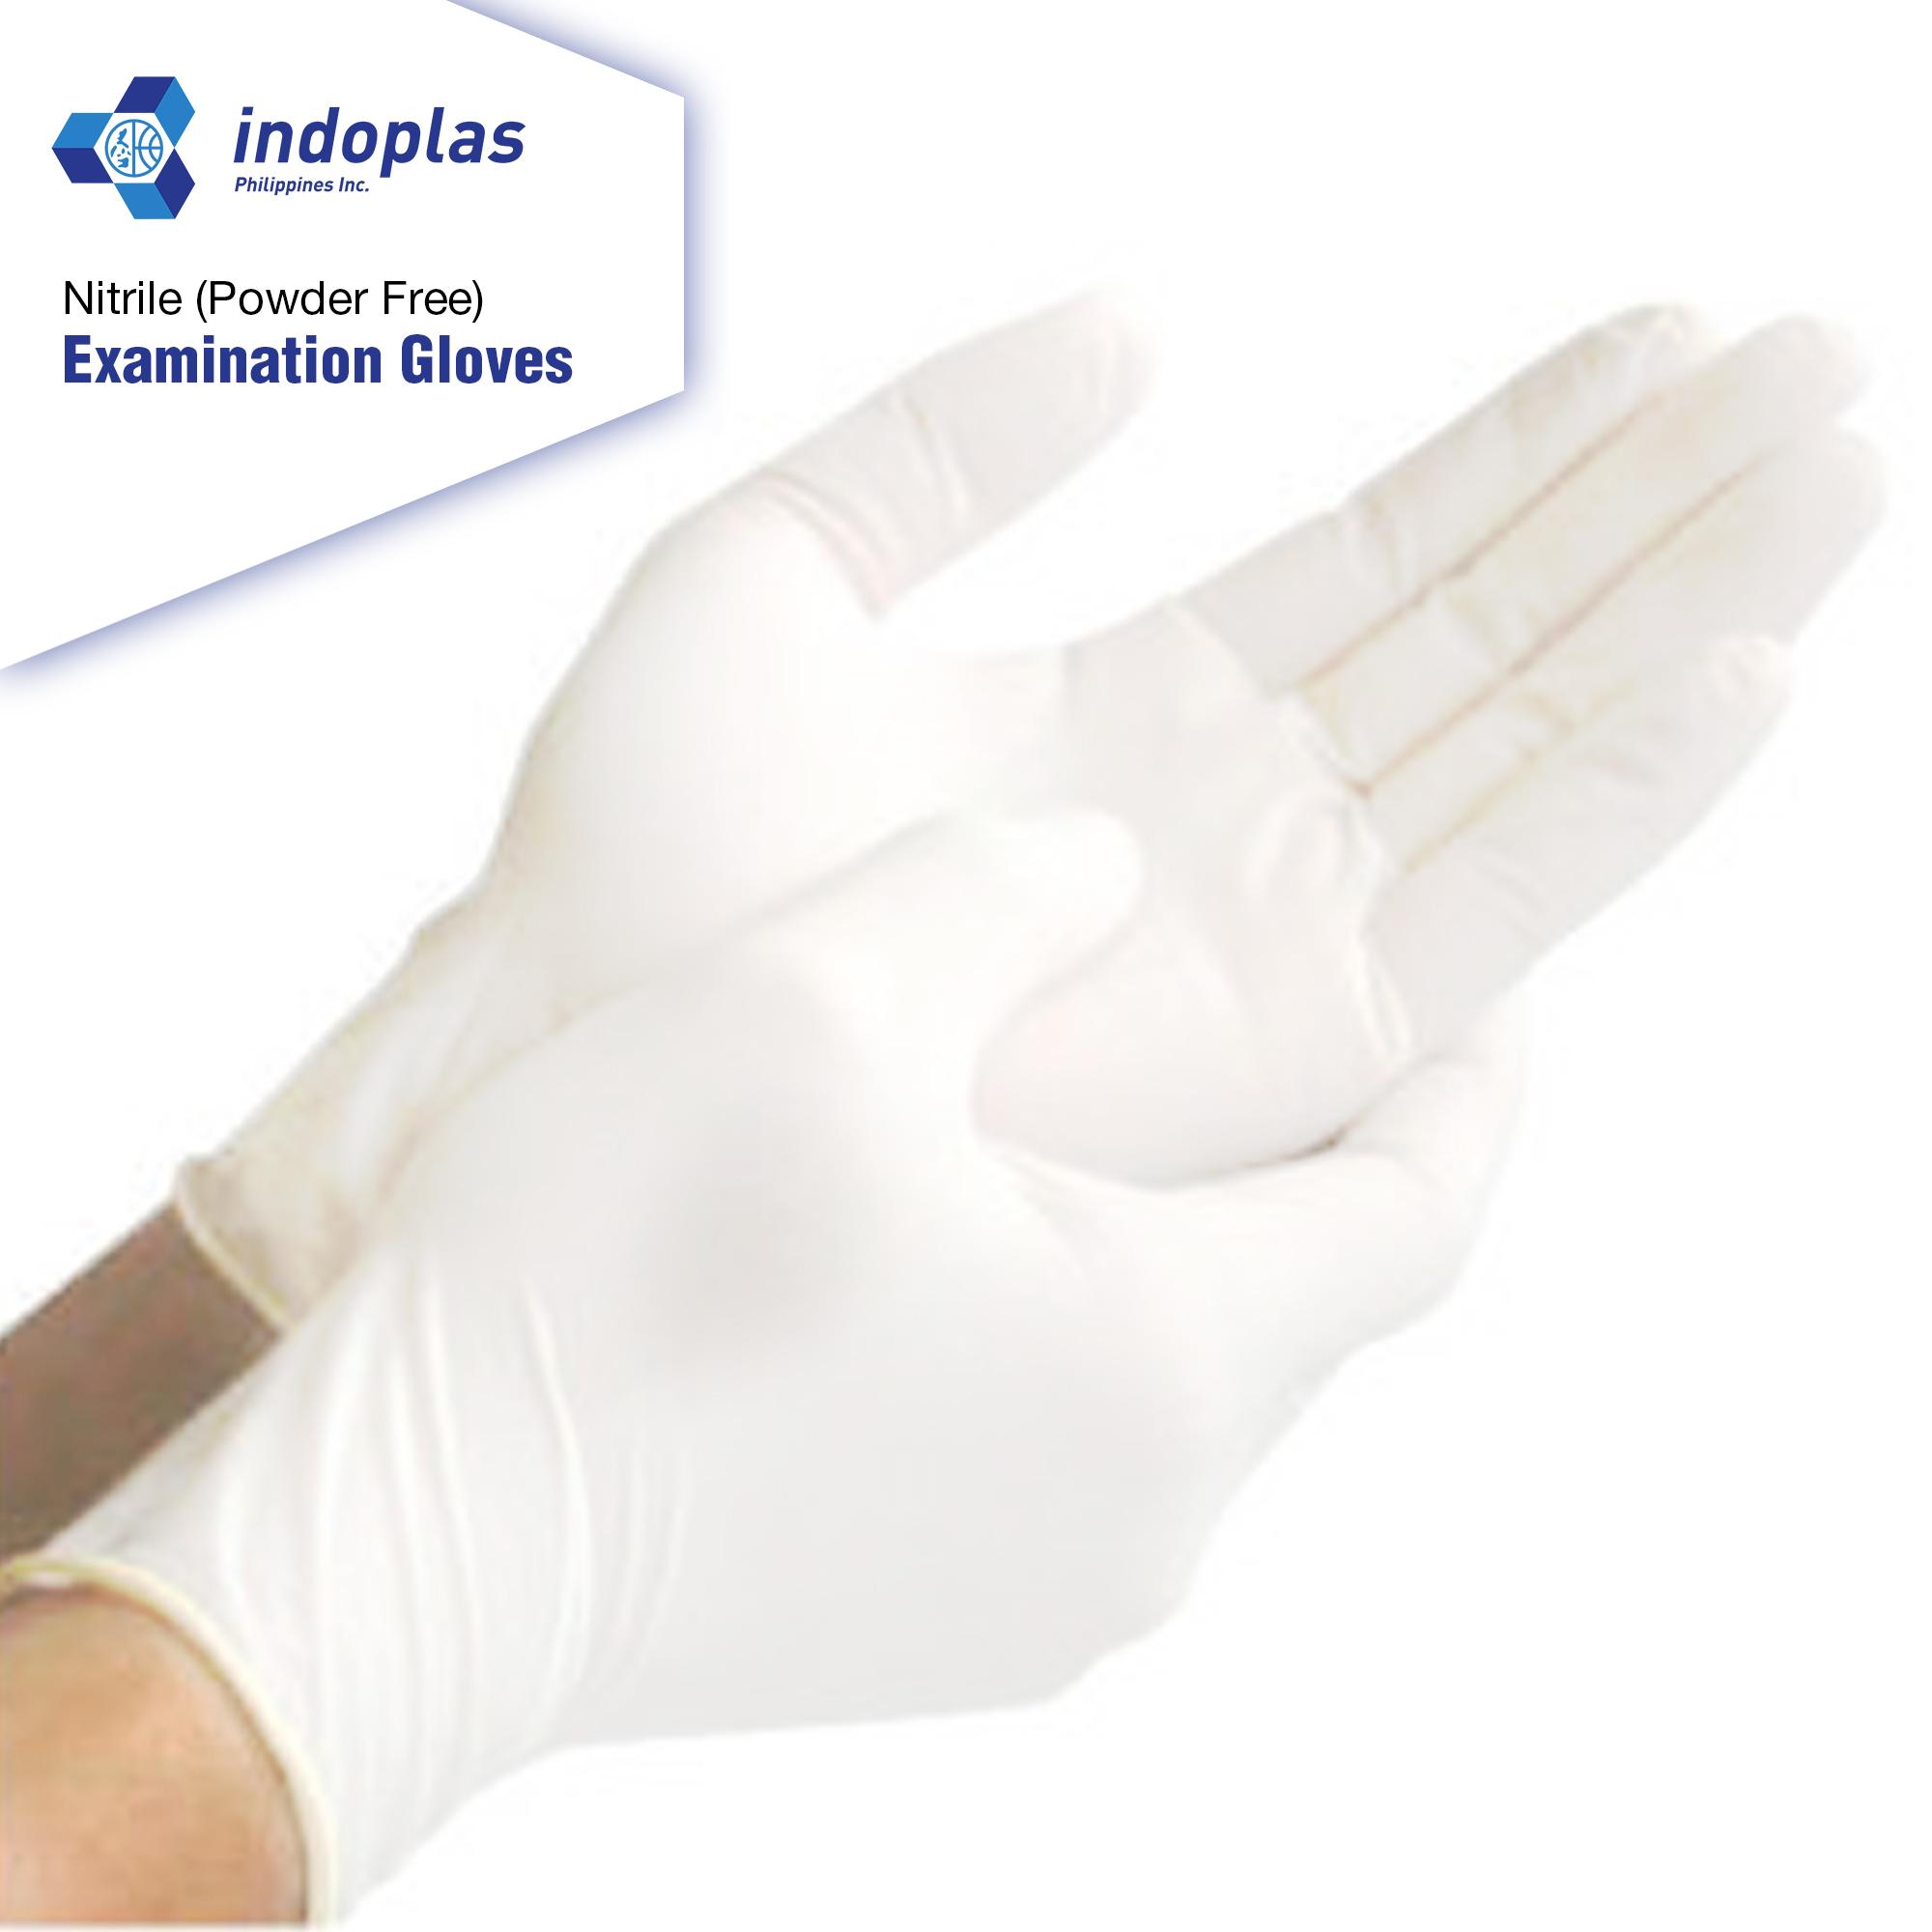 cost of disposable gloves